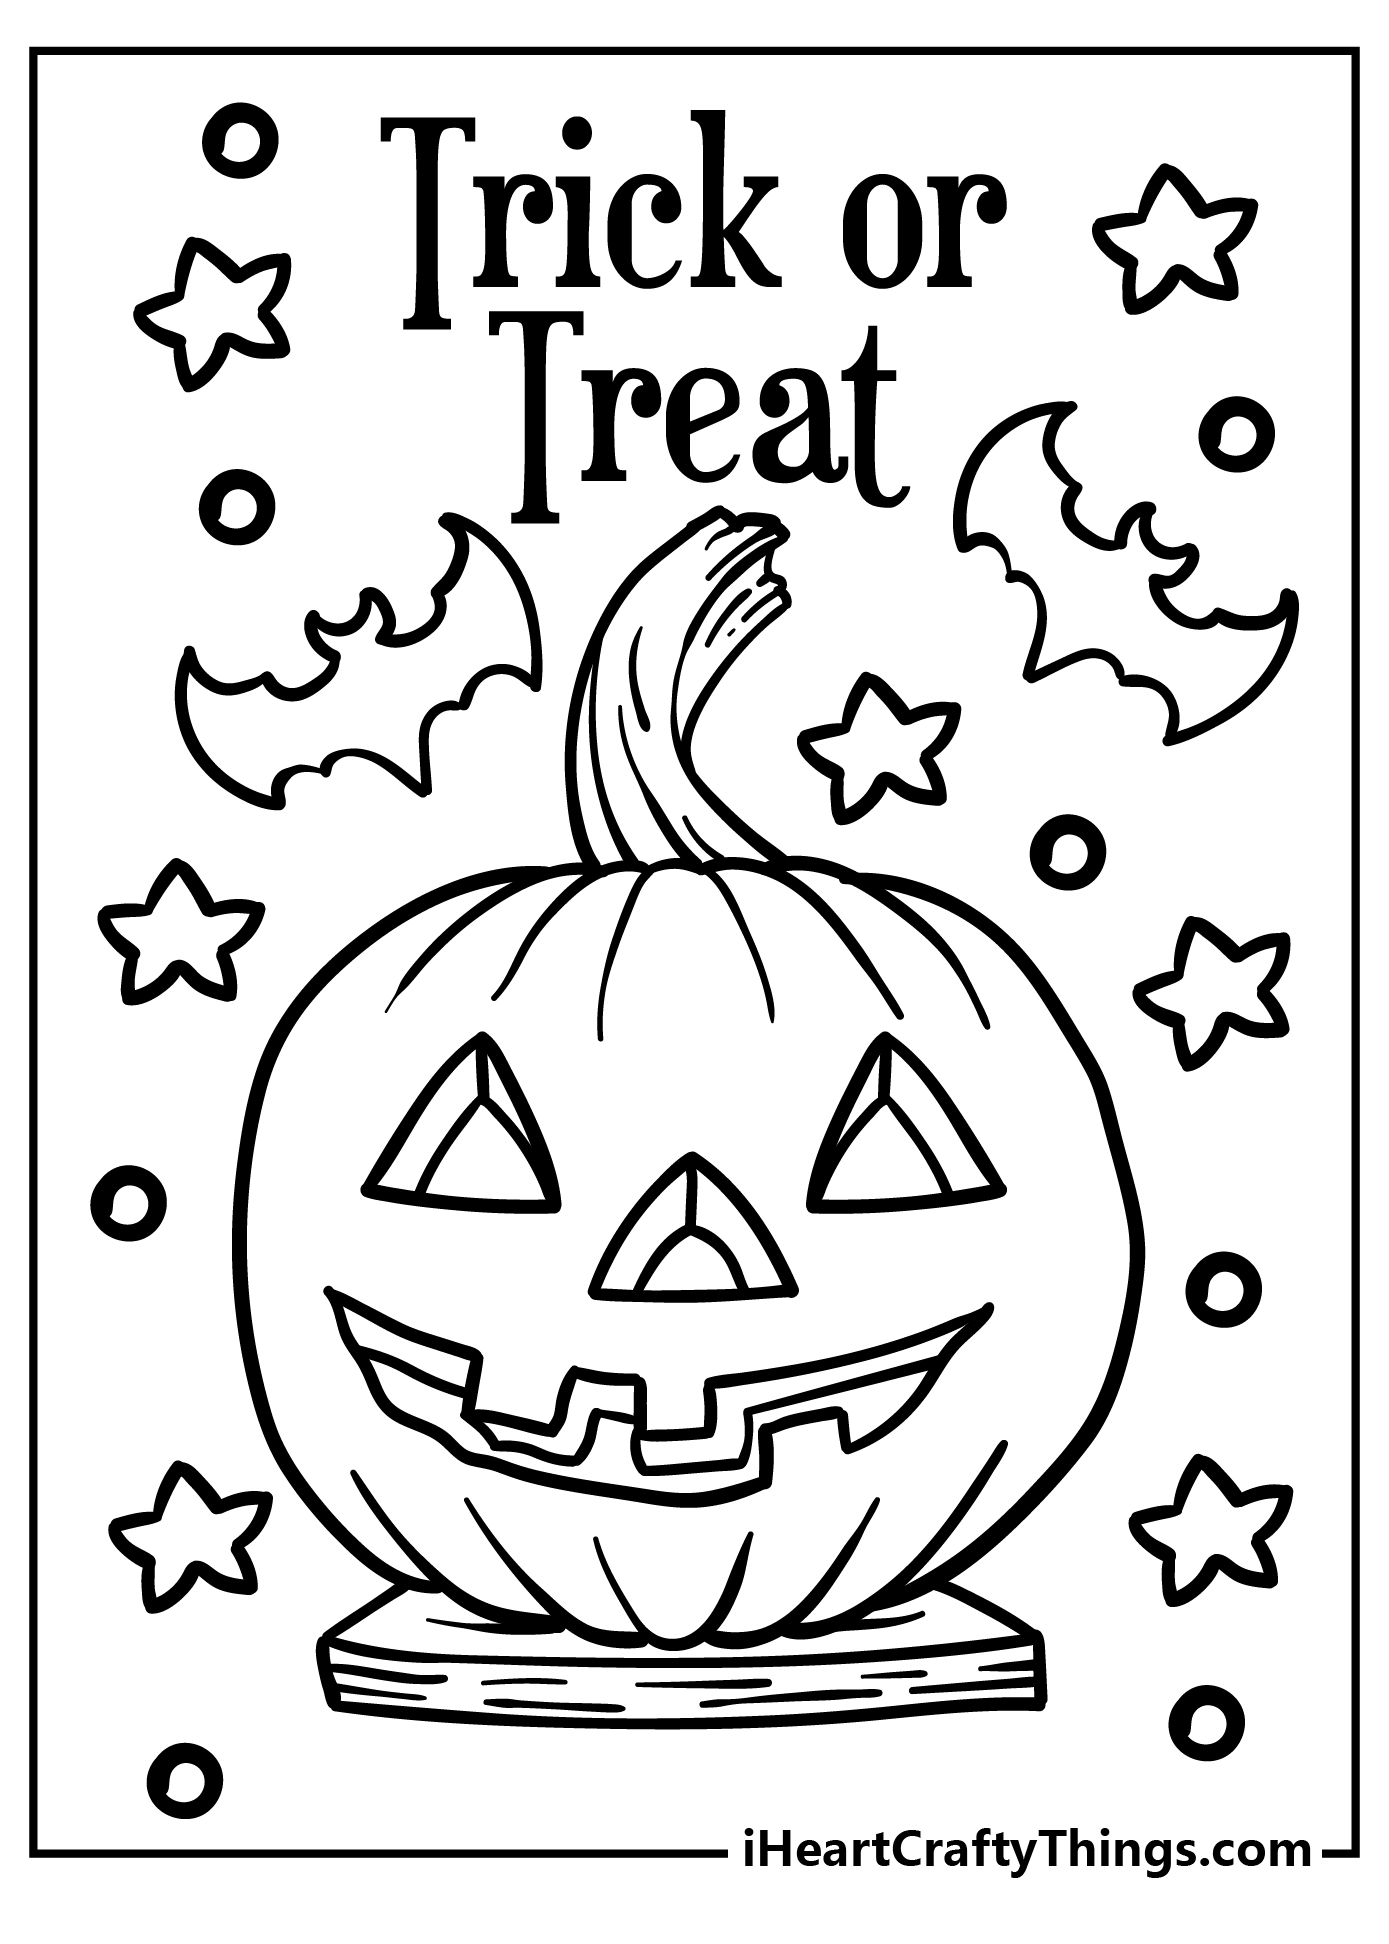 Trick Or Treat Coloring Pages for preschoolers free printable